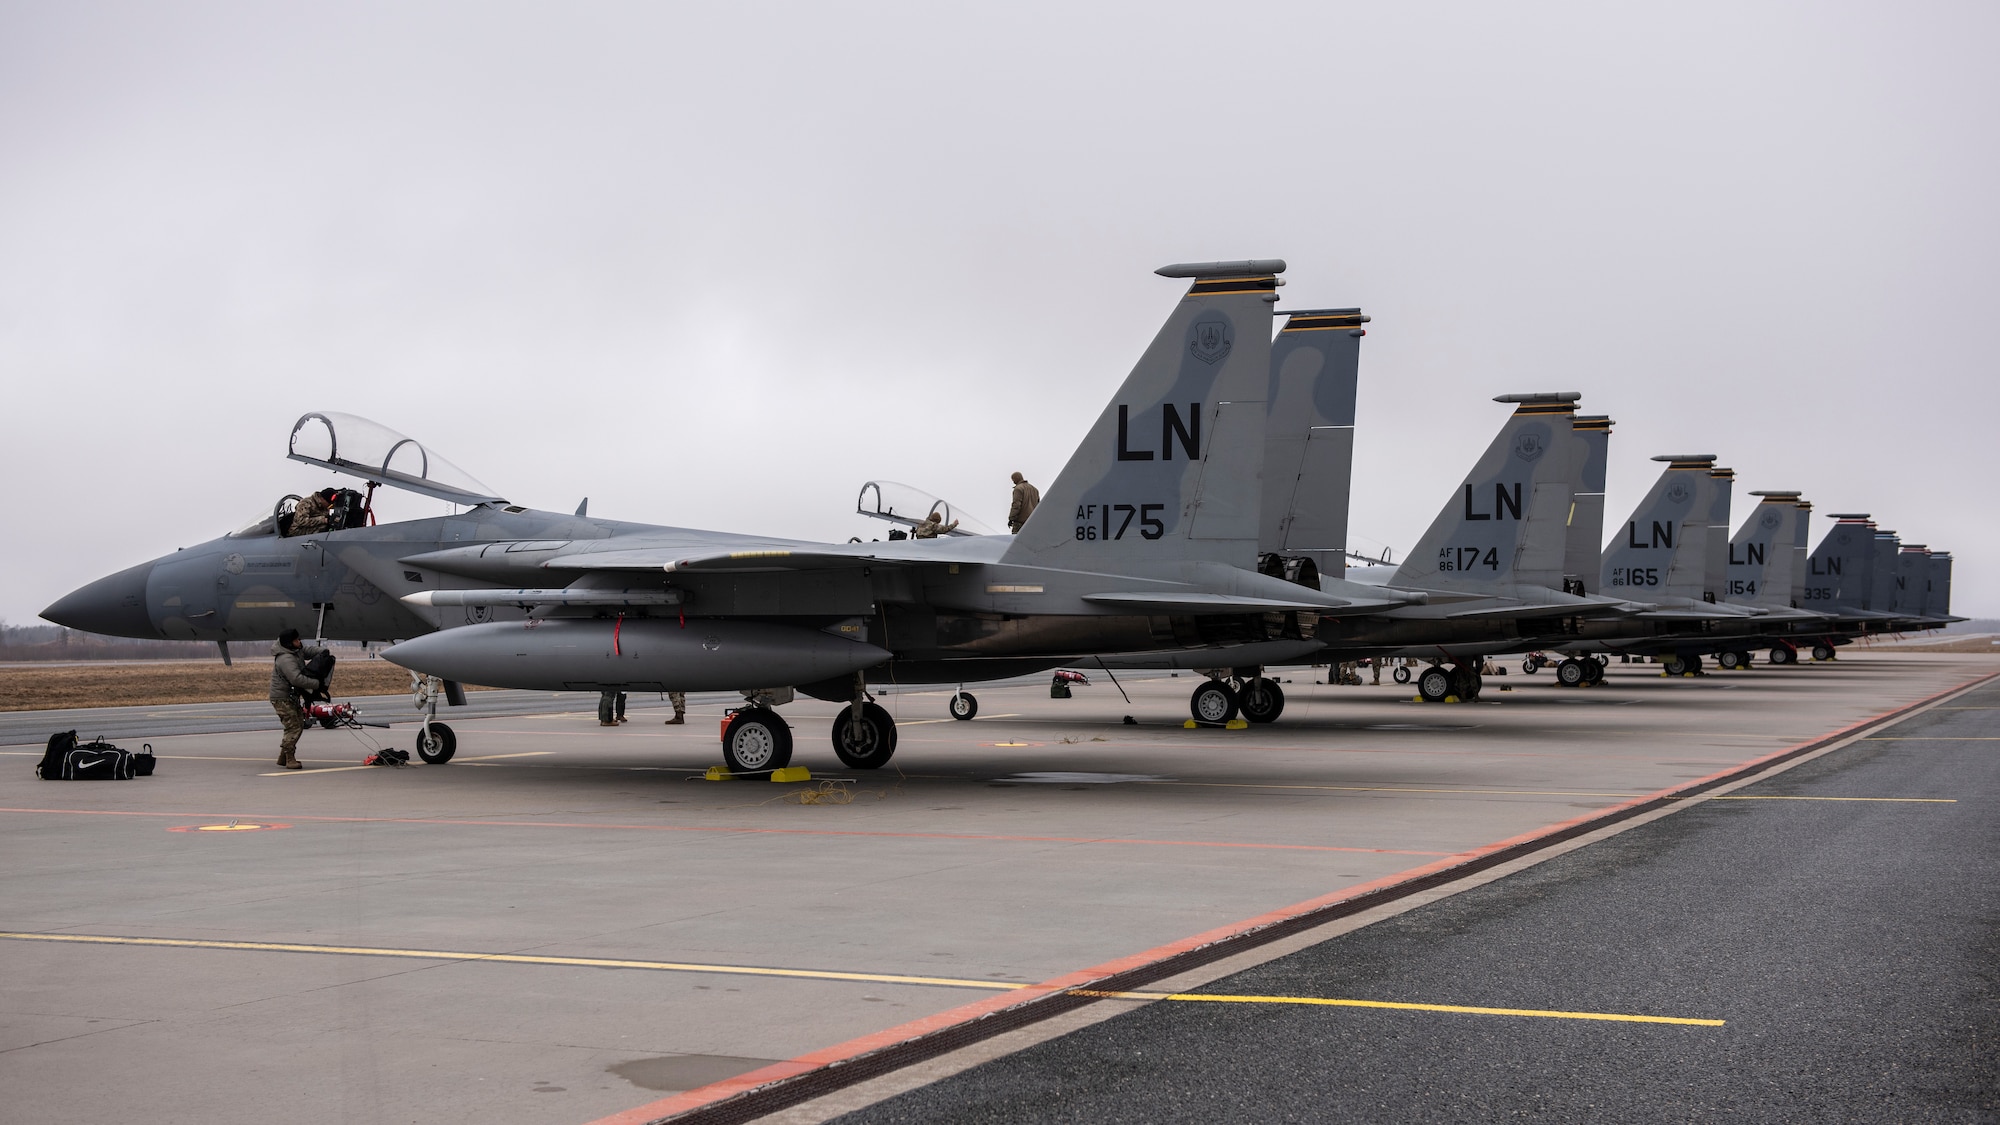 F-15C Eagles and F-15E Strike Eagles from the 48th Fighter Wing line the apron at Amari Air Base, Estonia, in support of Exercise Baltic Trident, March 15, 2021. Incorporating Agile Combat Employment concepts into exercises like Baltic Trident increases lethality and enhances interoperability with NATO allies and partner nations, ensuring the ability to counter military aggression and coercion by sharing responsibilities for common defense. (U.S. Air Force photo by Airman 1st Class Jessi Monte)